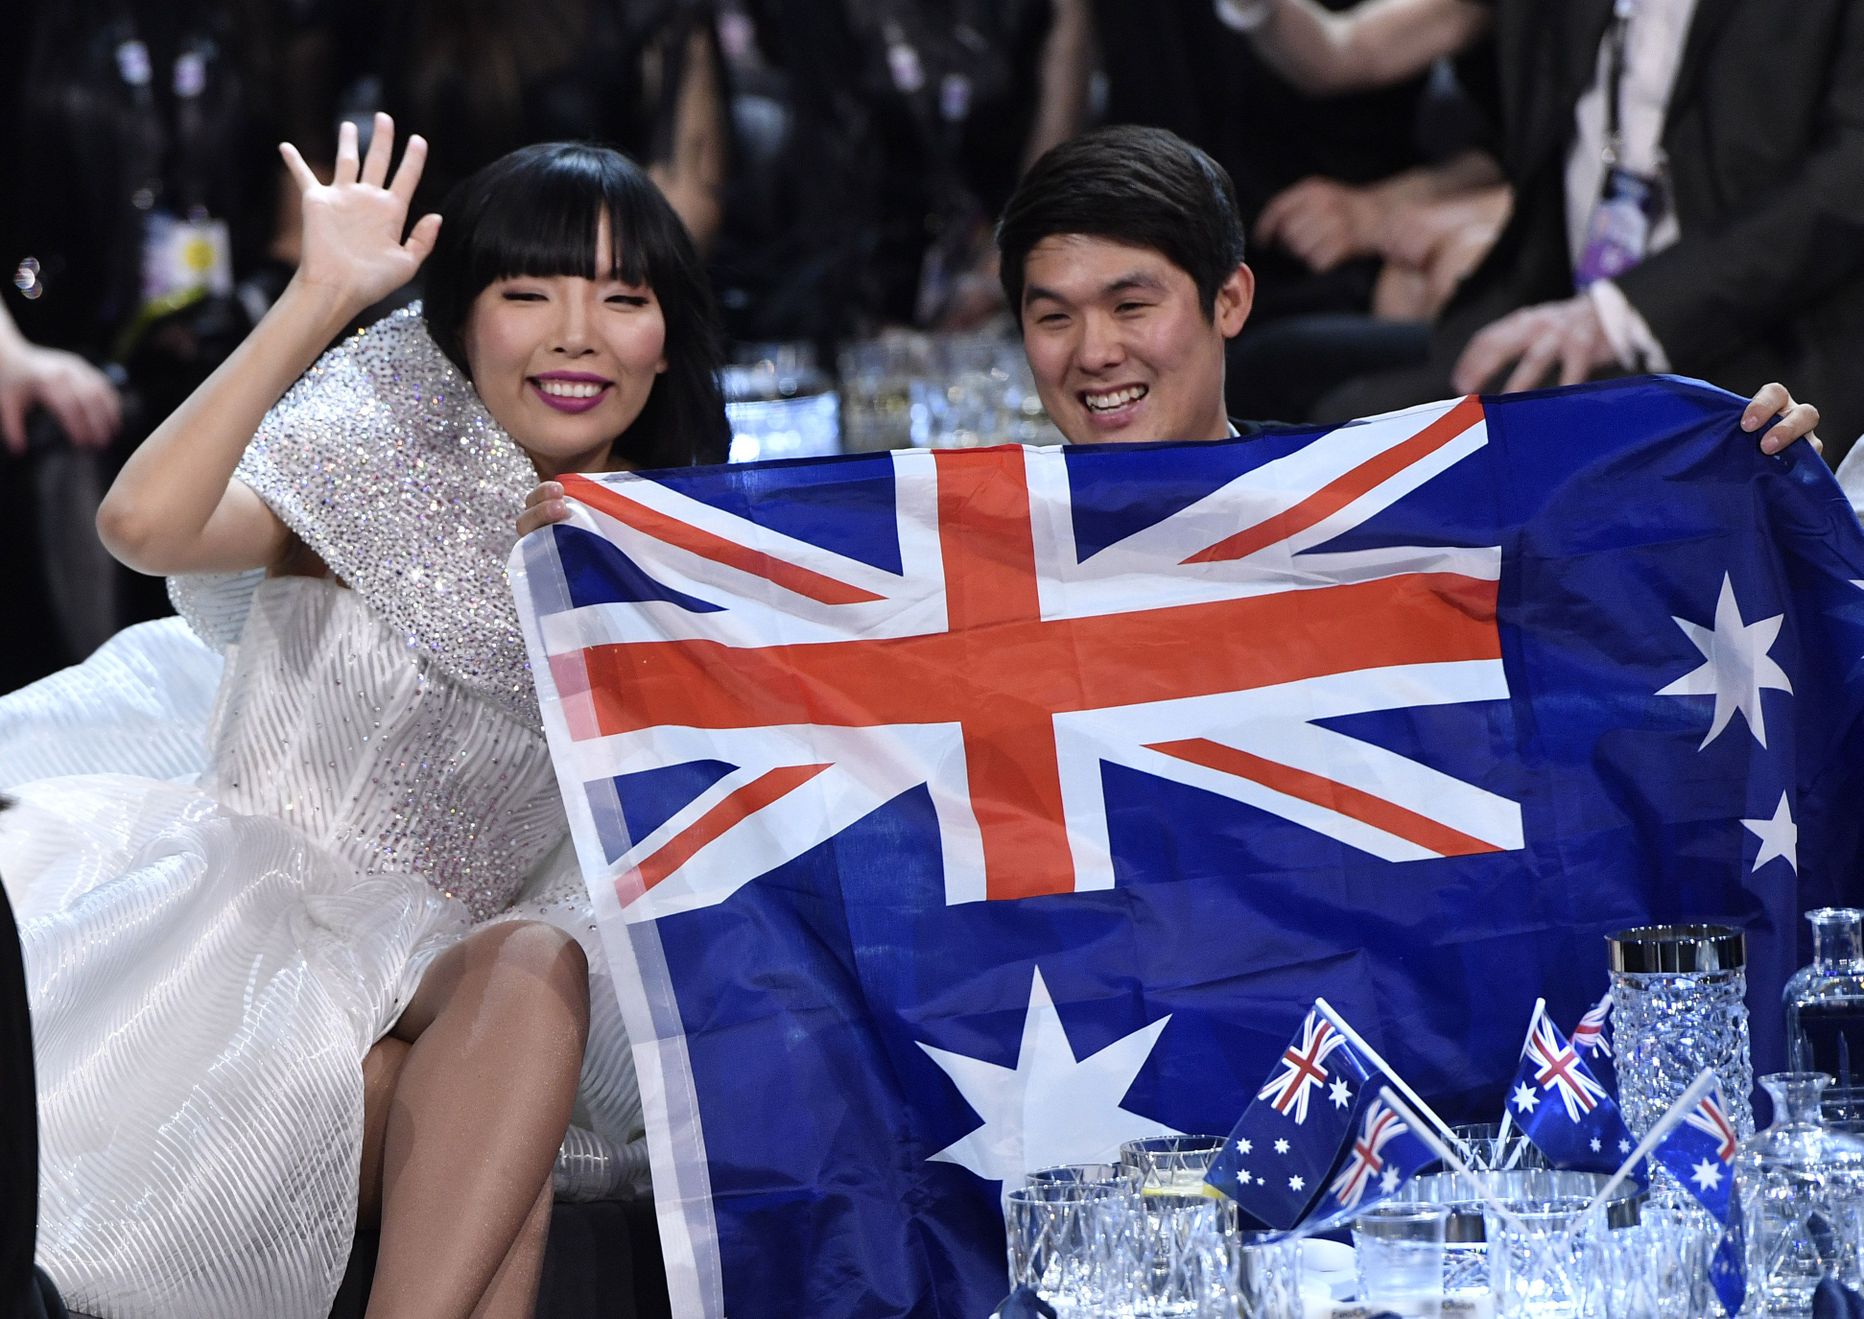 Australia's Dami Im, left, holds an Australian flag during the second Eurovision Song Contest semifinal in Stockholm, Sweden, Thursday, May 12, 2016. (AP Photo/Martin Meissner)